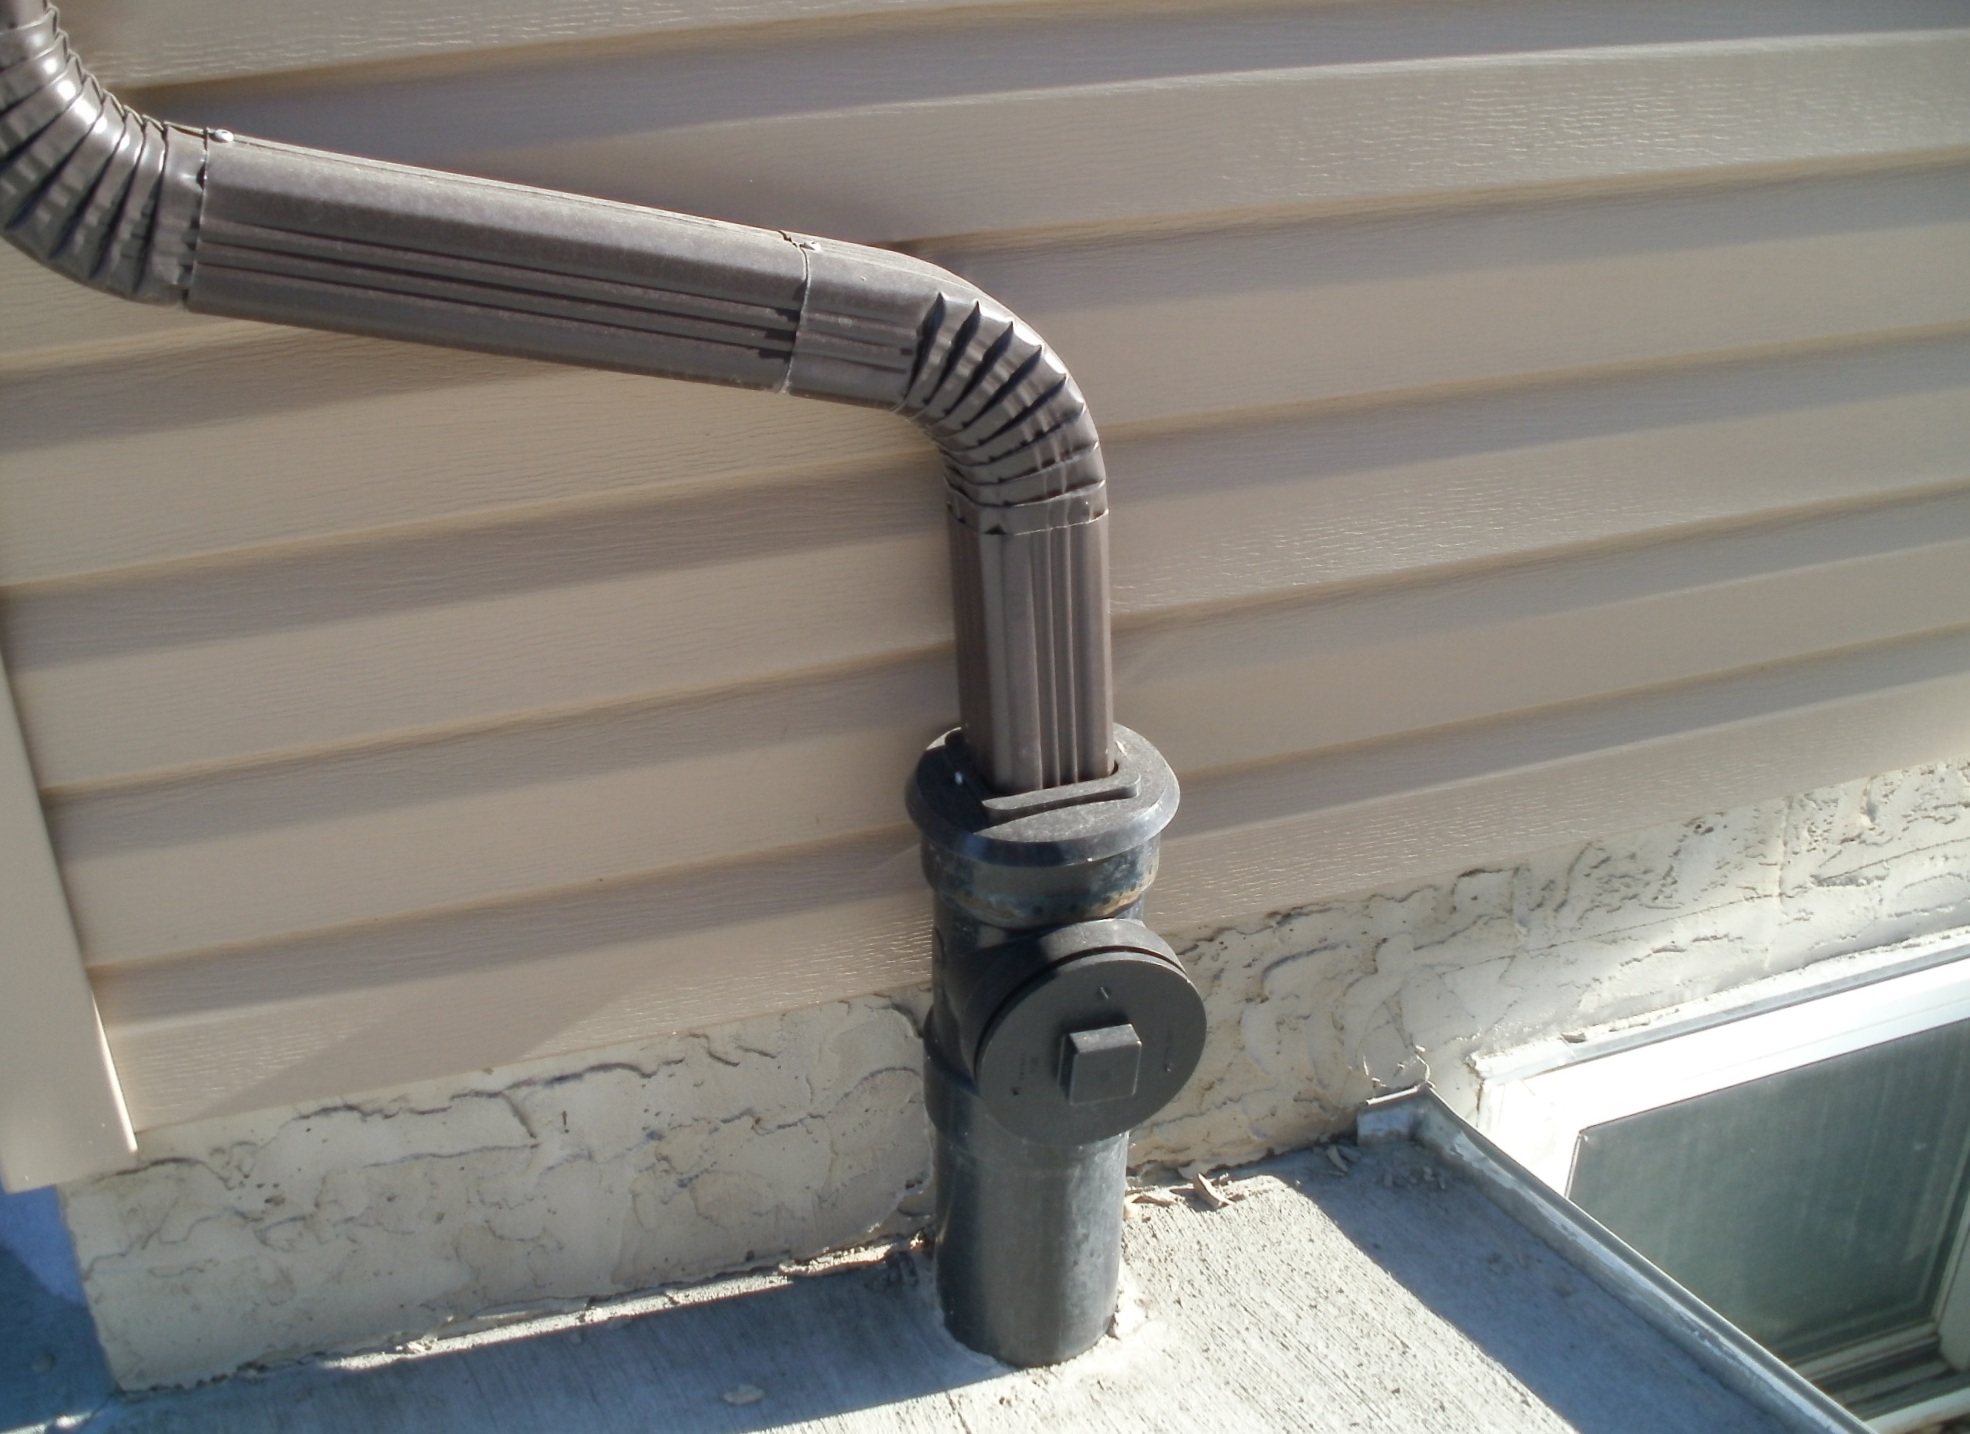 Downspout and Storm Service Connection